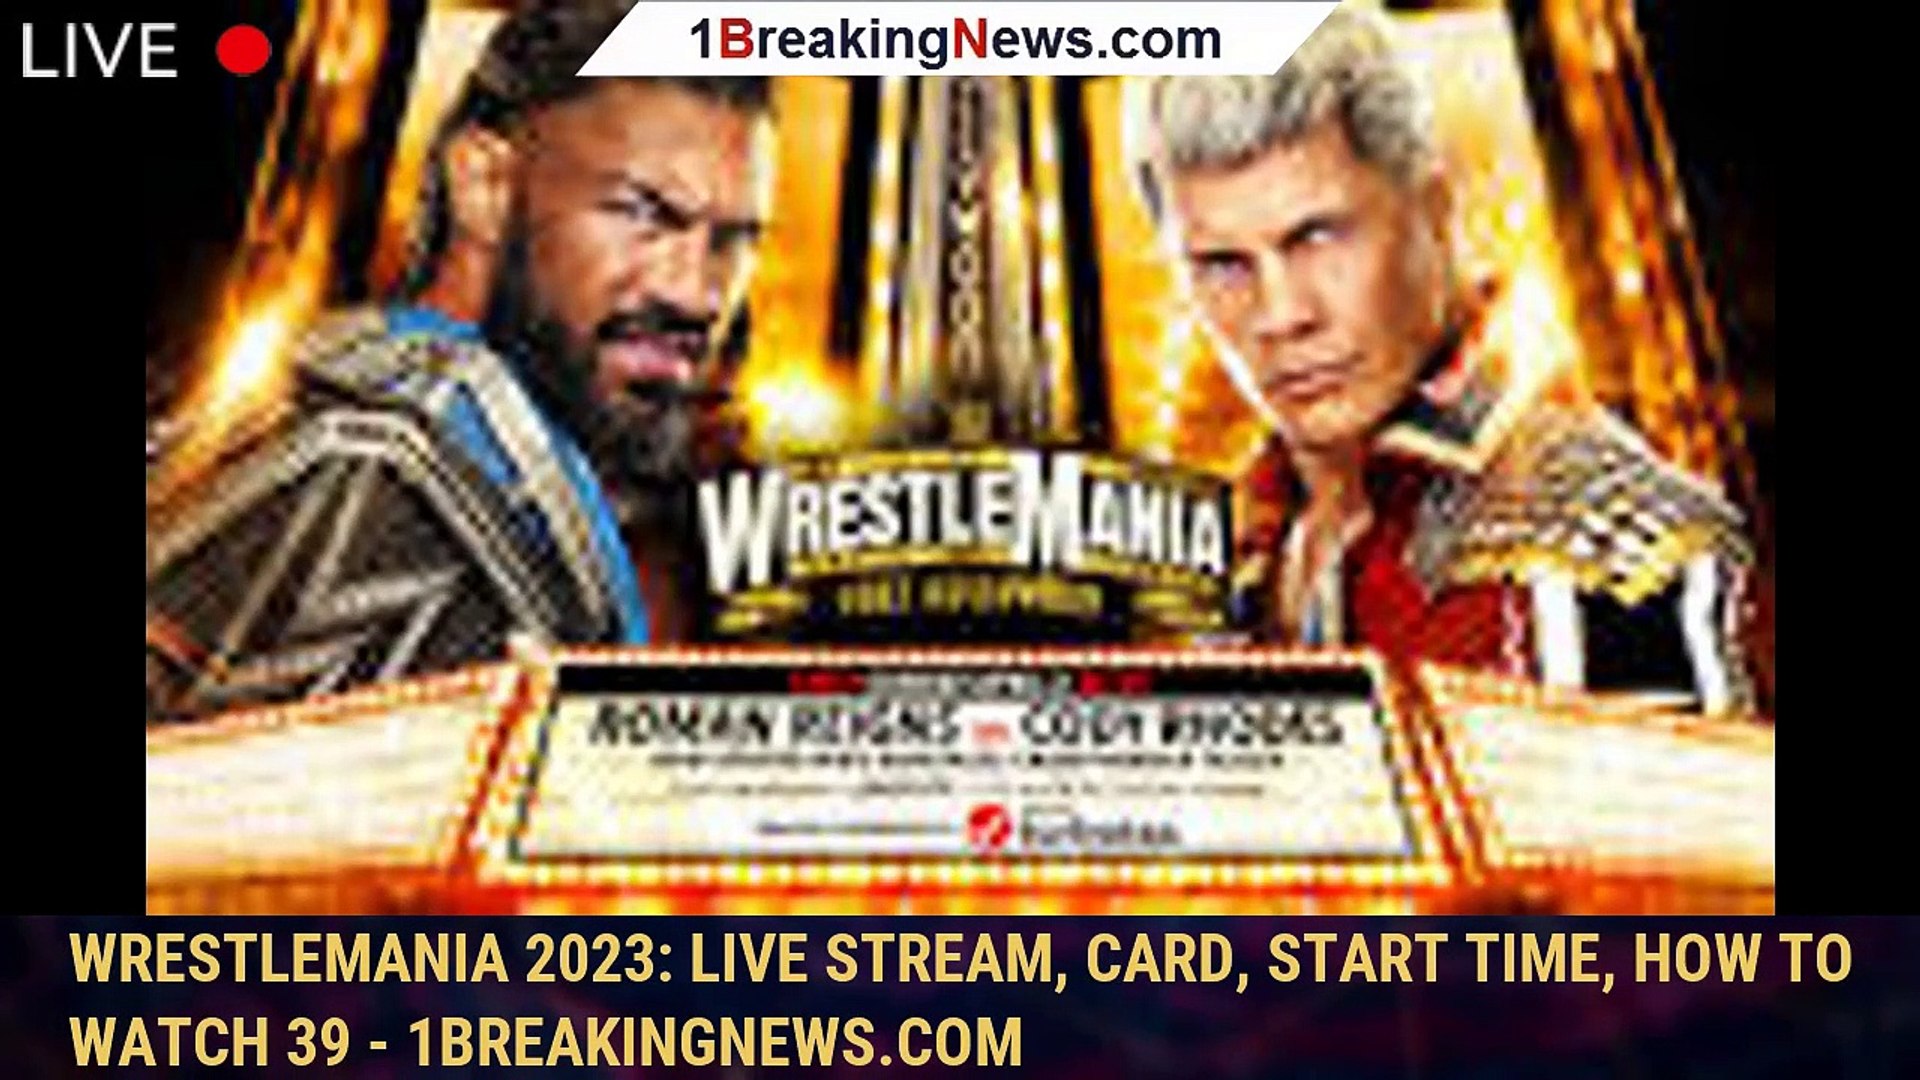 WrestleMania 2023 Live stream, card, start time, how to watch 39 - 1breakingnews